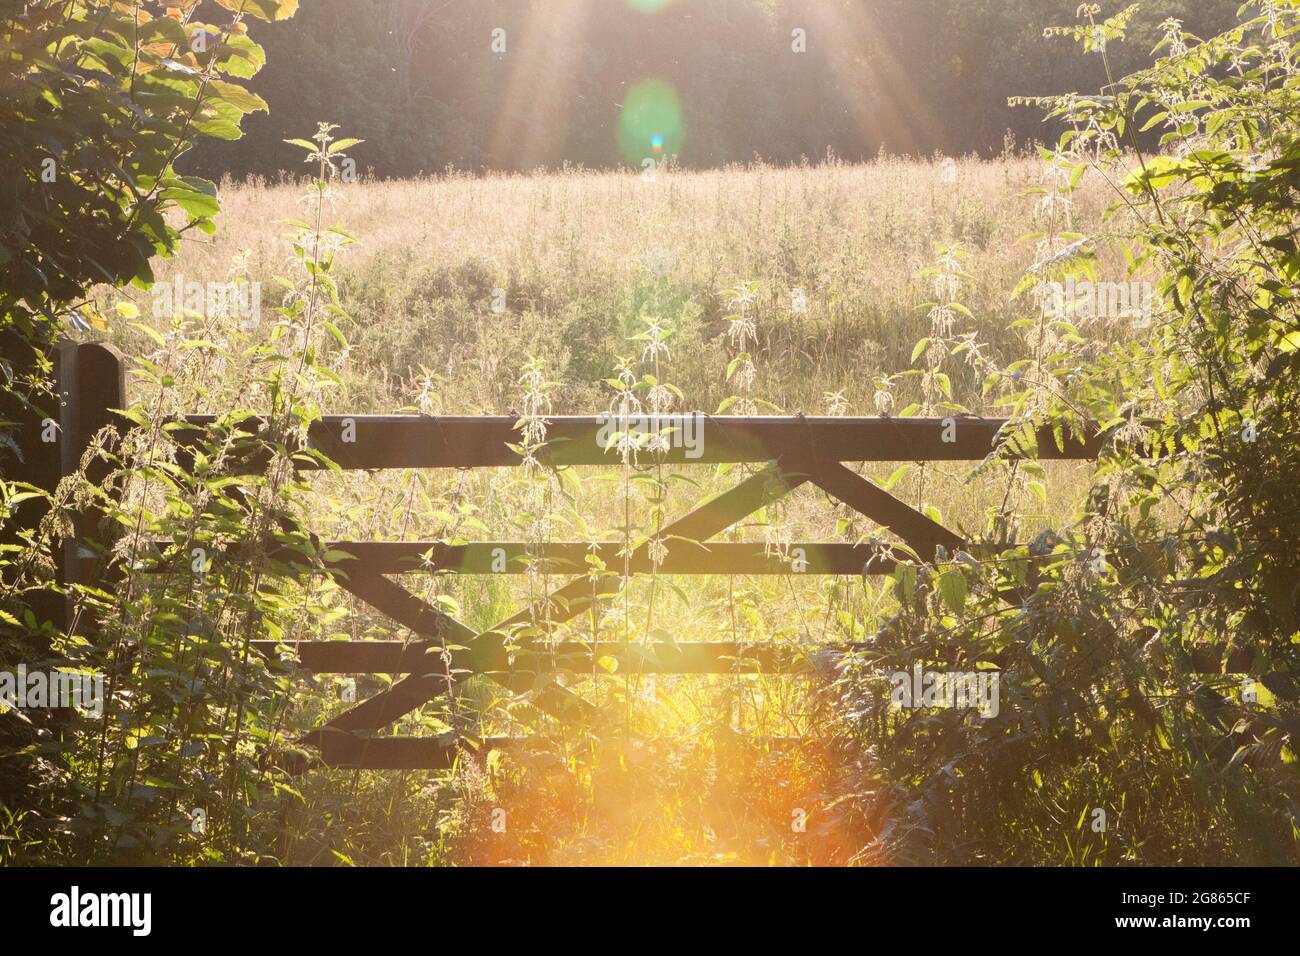 East Sussex, UK. 16 July 2021: Golden light at sunset illuminates a 5-bar gate in the East Sussex countryside, near Rotherfield. England is set to experience a mini heatwave this weekend with temperatures reaching up to 30 centigrade on Sunday. Anna Watson/Alamy Live News. Stock Photo